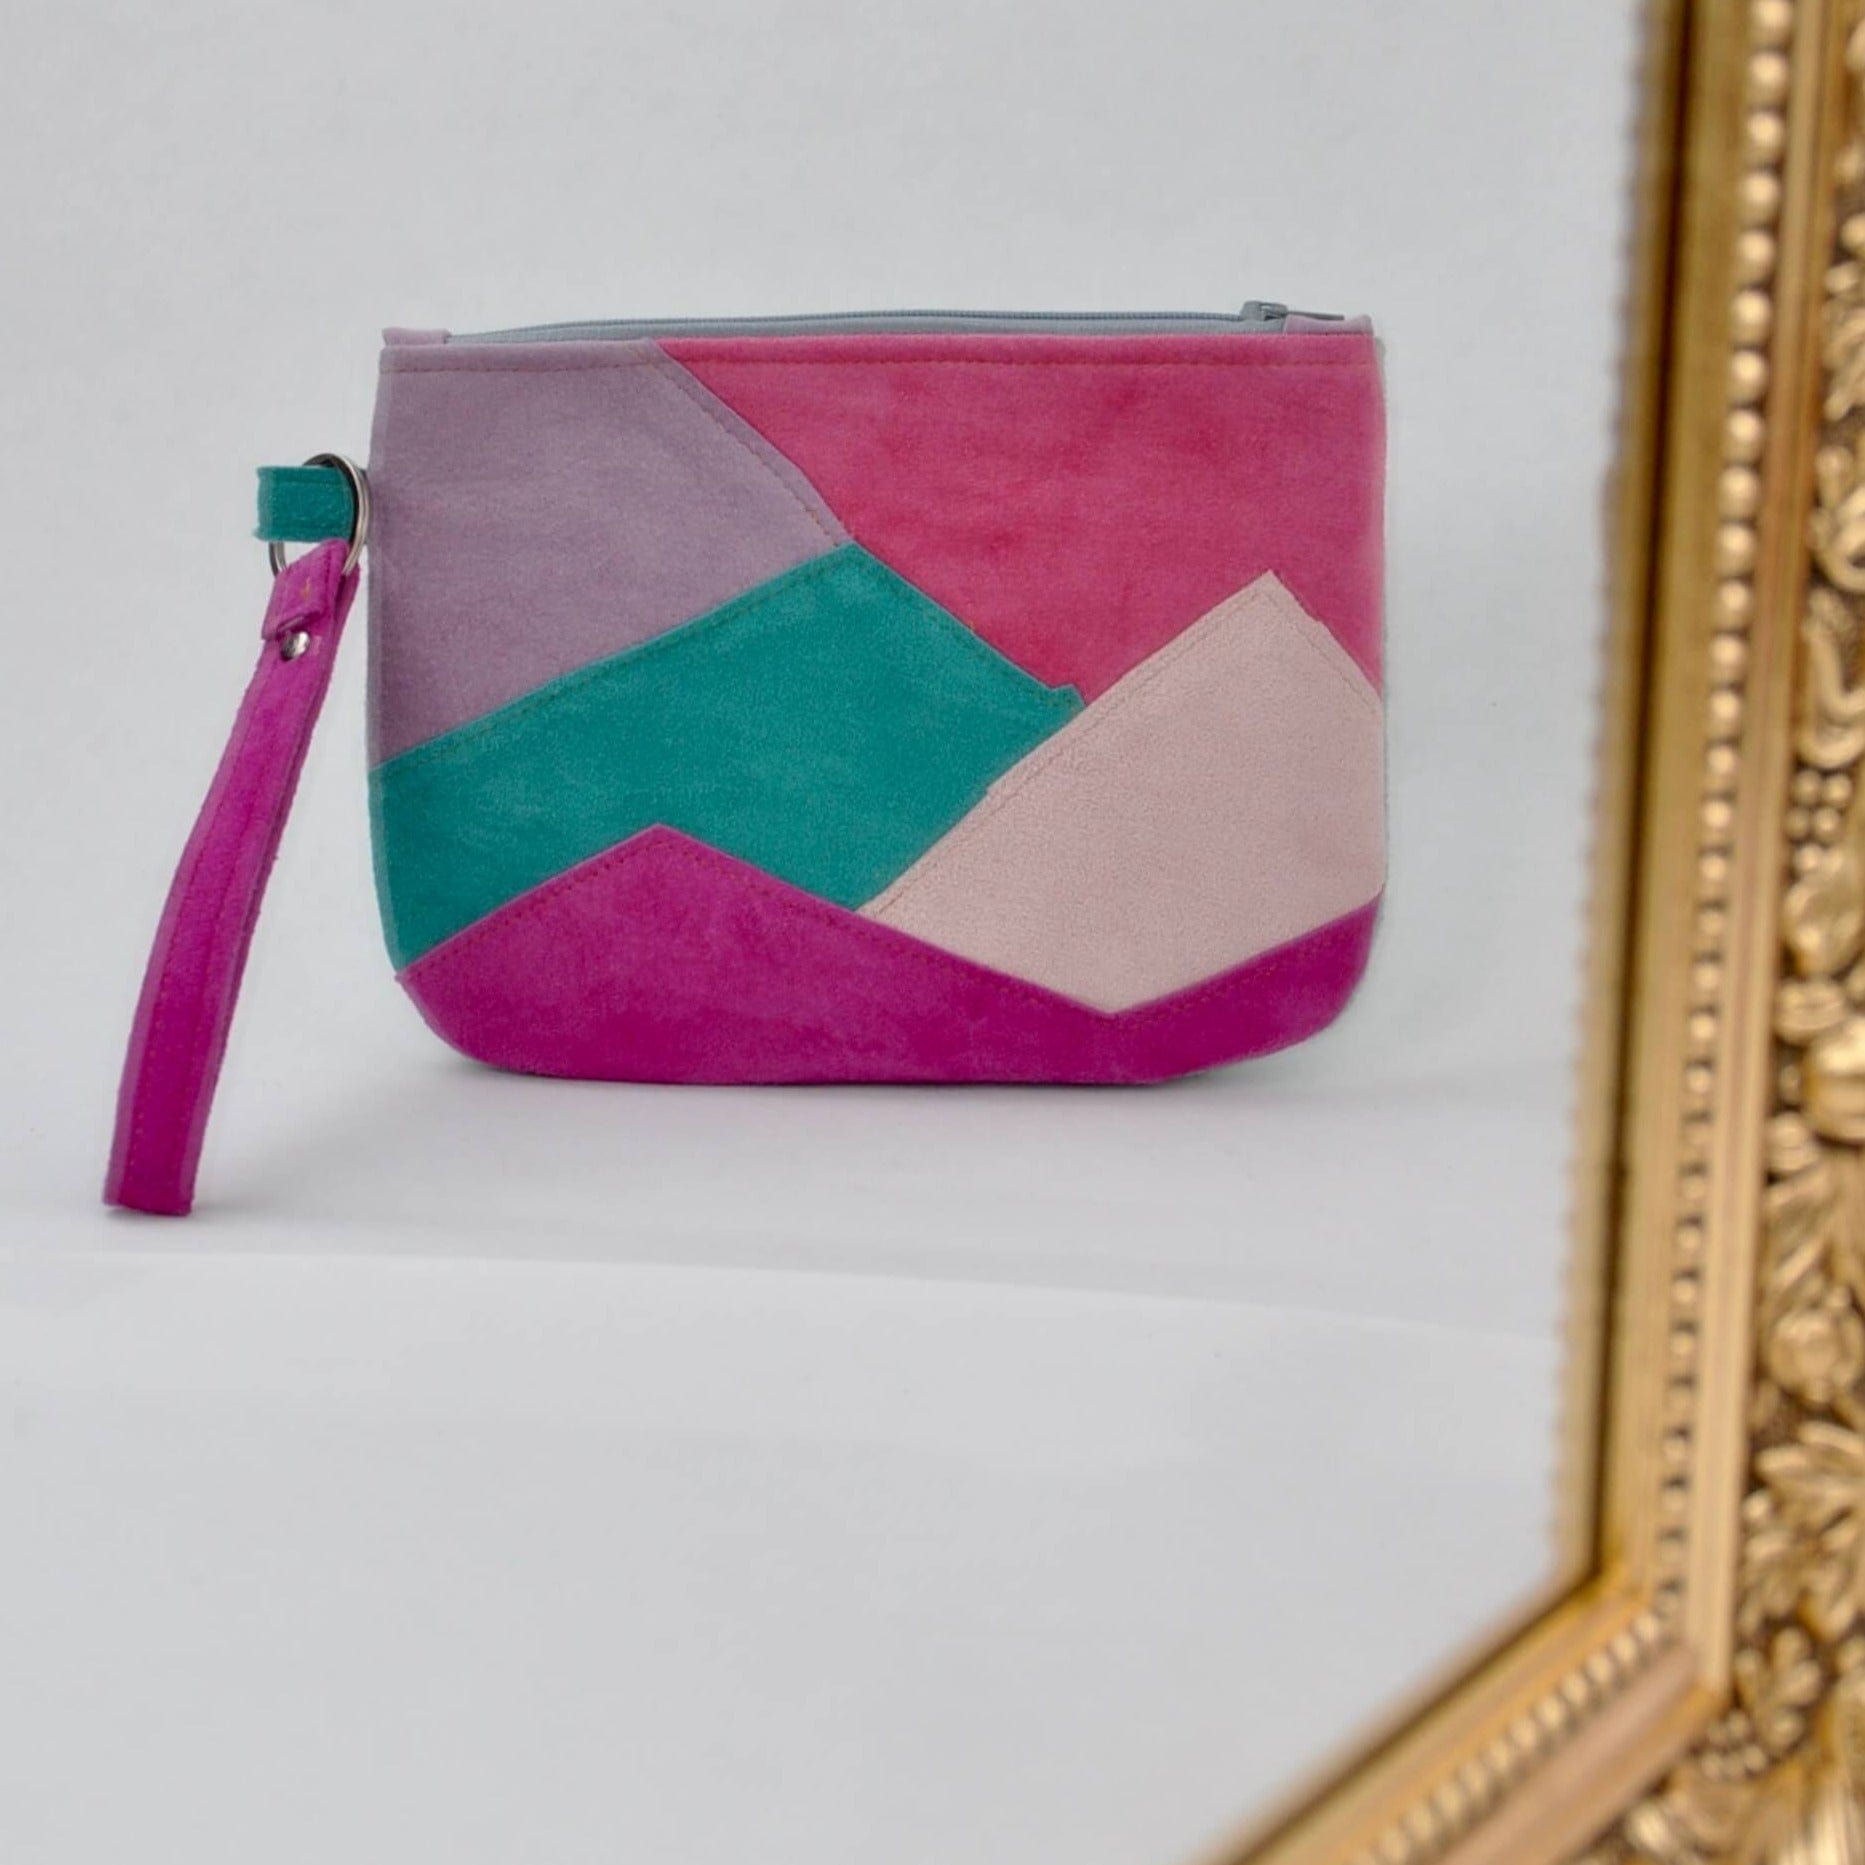 Zoe Dunn Designs Pink/Turquoise Leather Clutch Bag